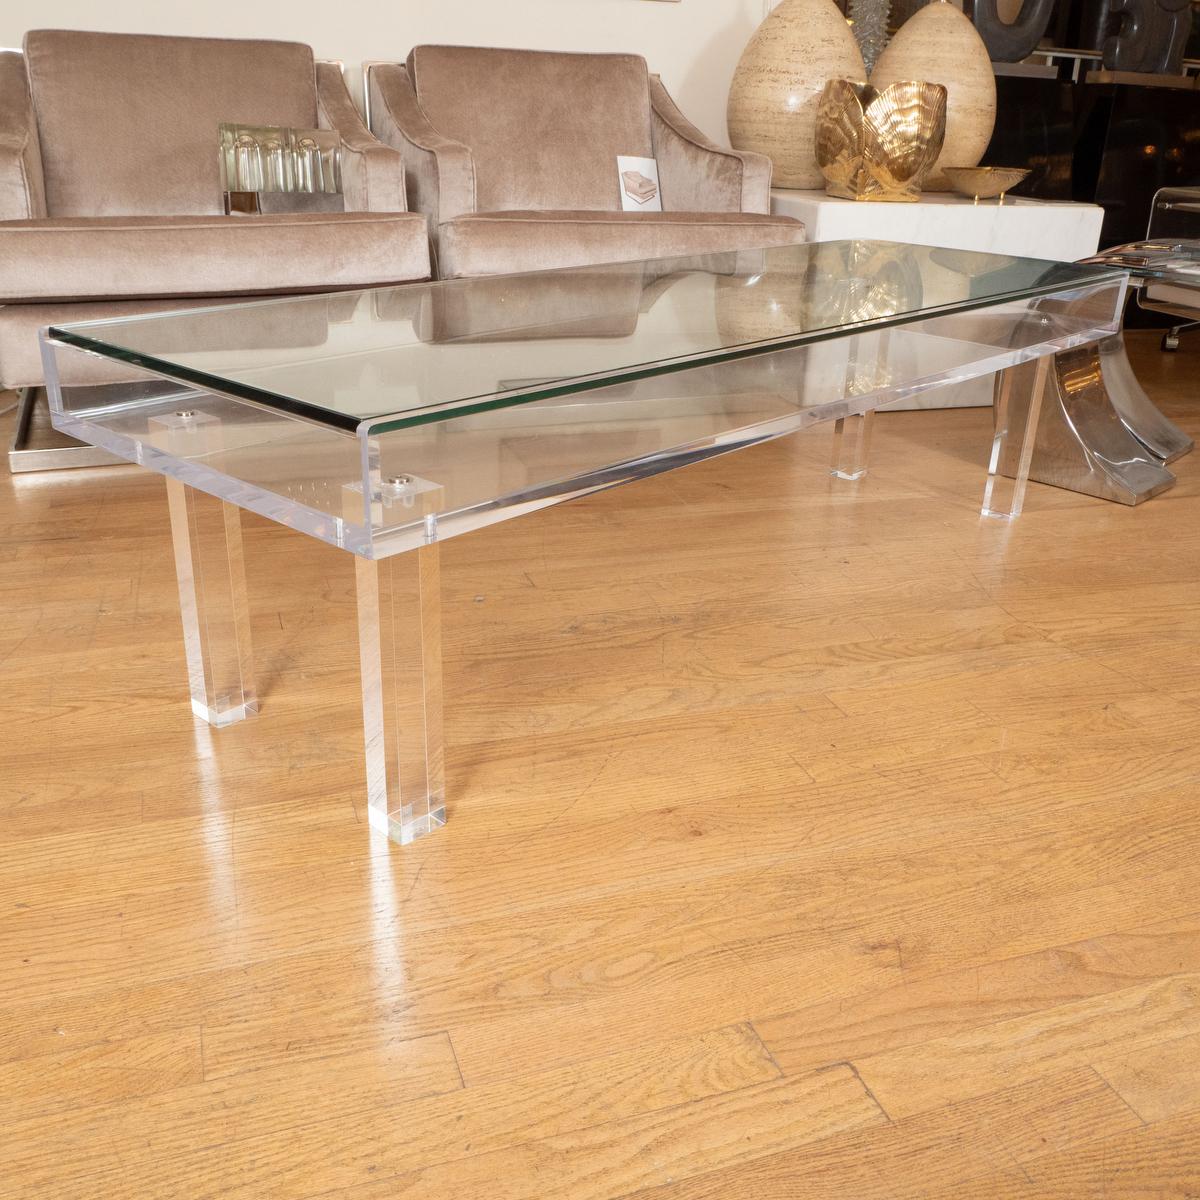 Slender sliding top Lucite and glass coffee table.